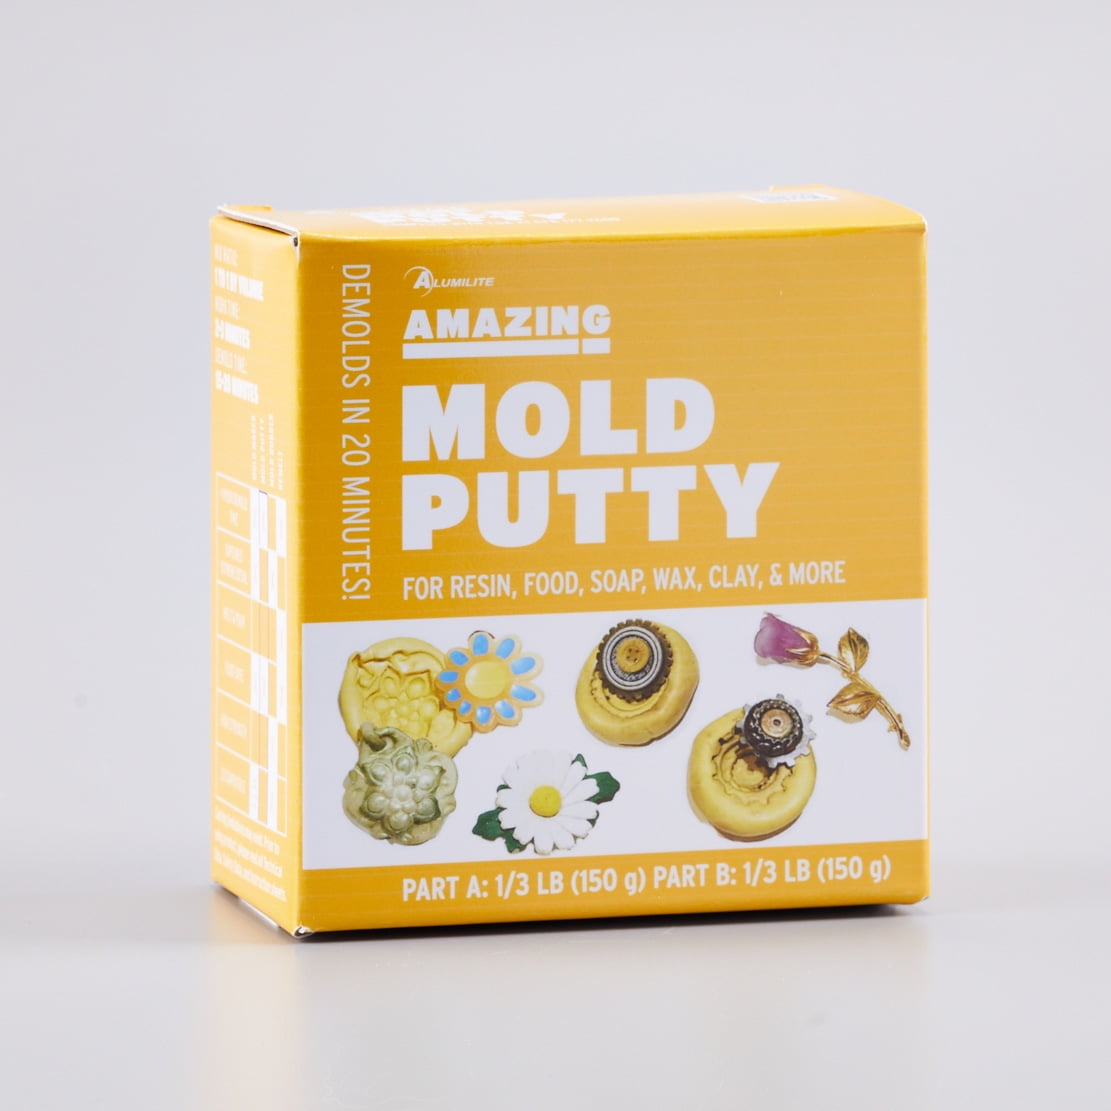 Amazing Mold Putty Kit 10570 N - FOR RESIN, FOOD, SOAP, WAX, CLAY & MORE -  NEW